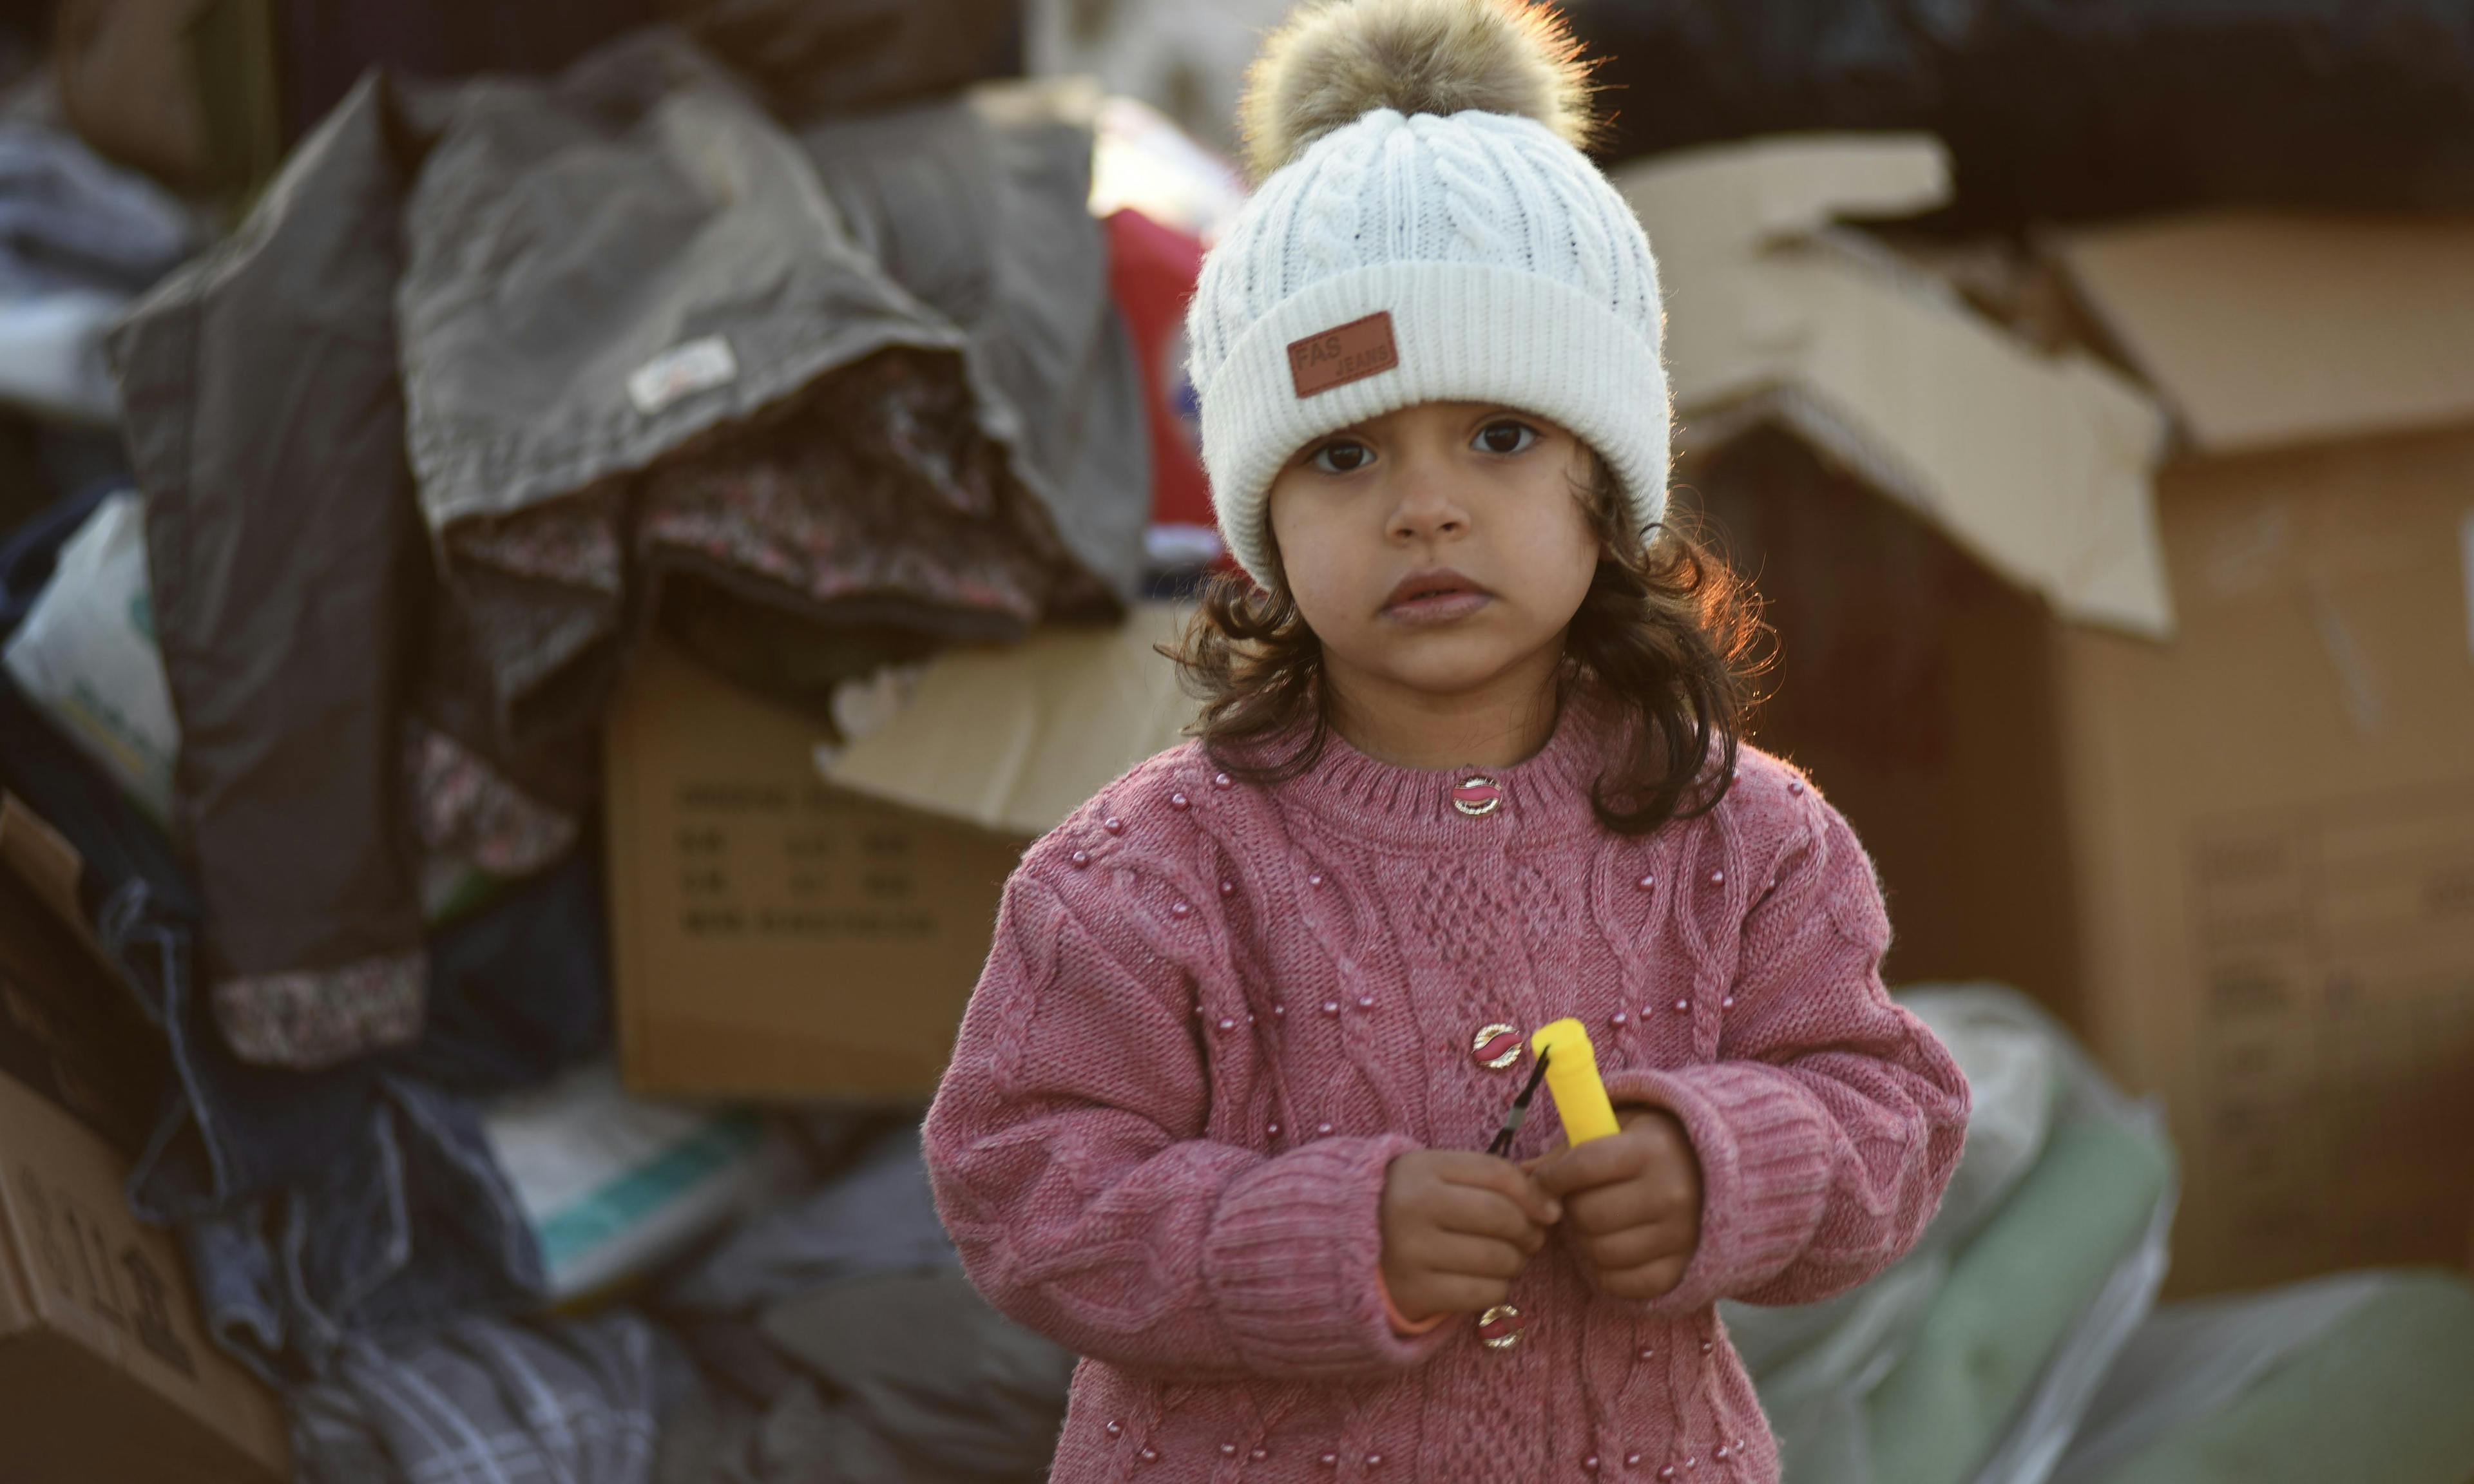 A little girl stands amongst the boxes of supplies sent to the survivors of the 7.7 magnitude earthquake in Kahramanmaraş, Türkiye.